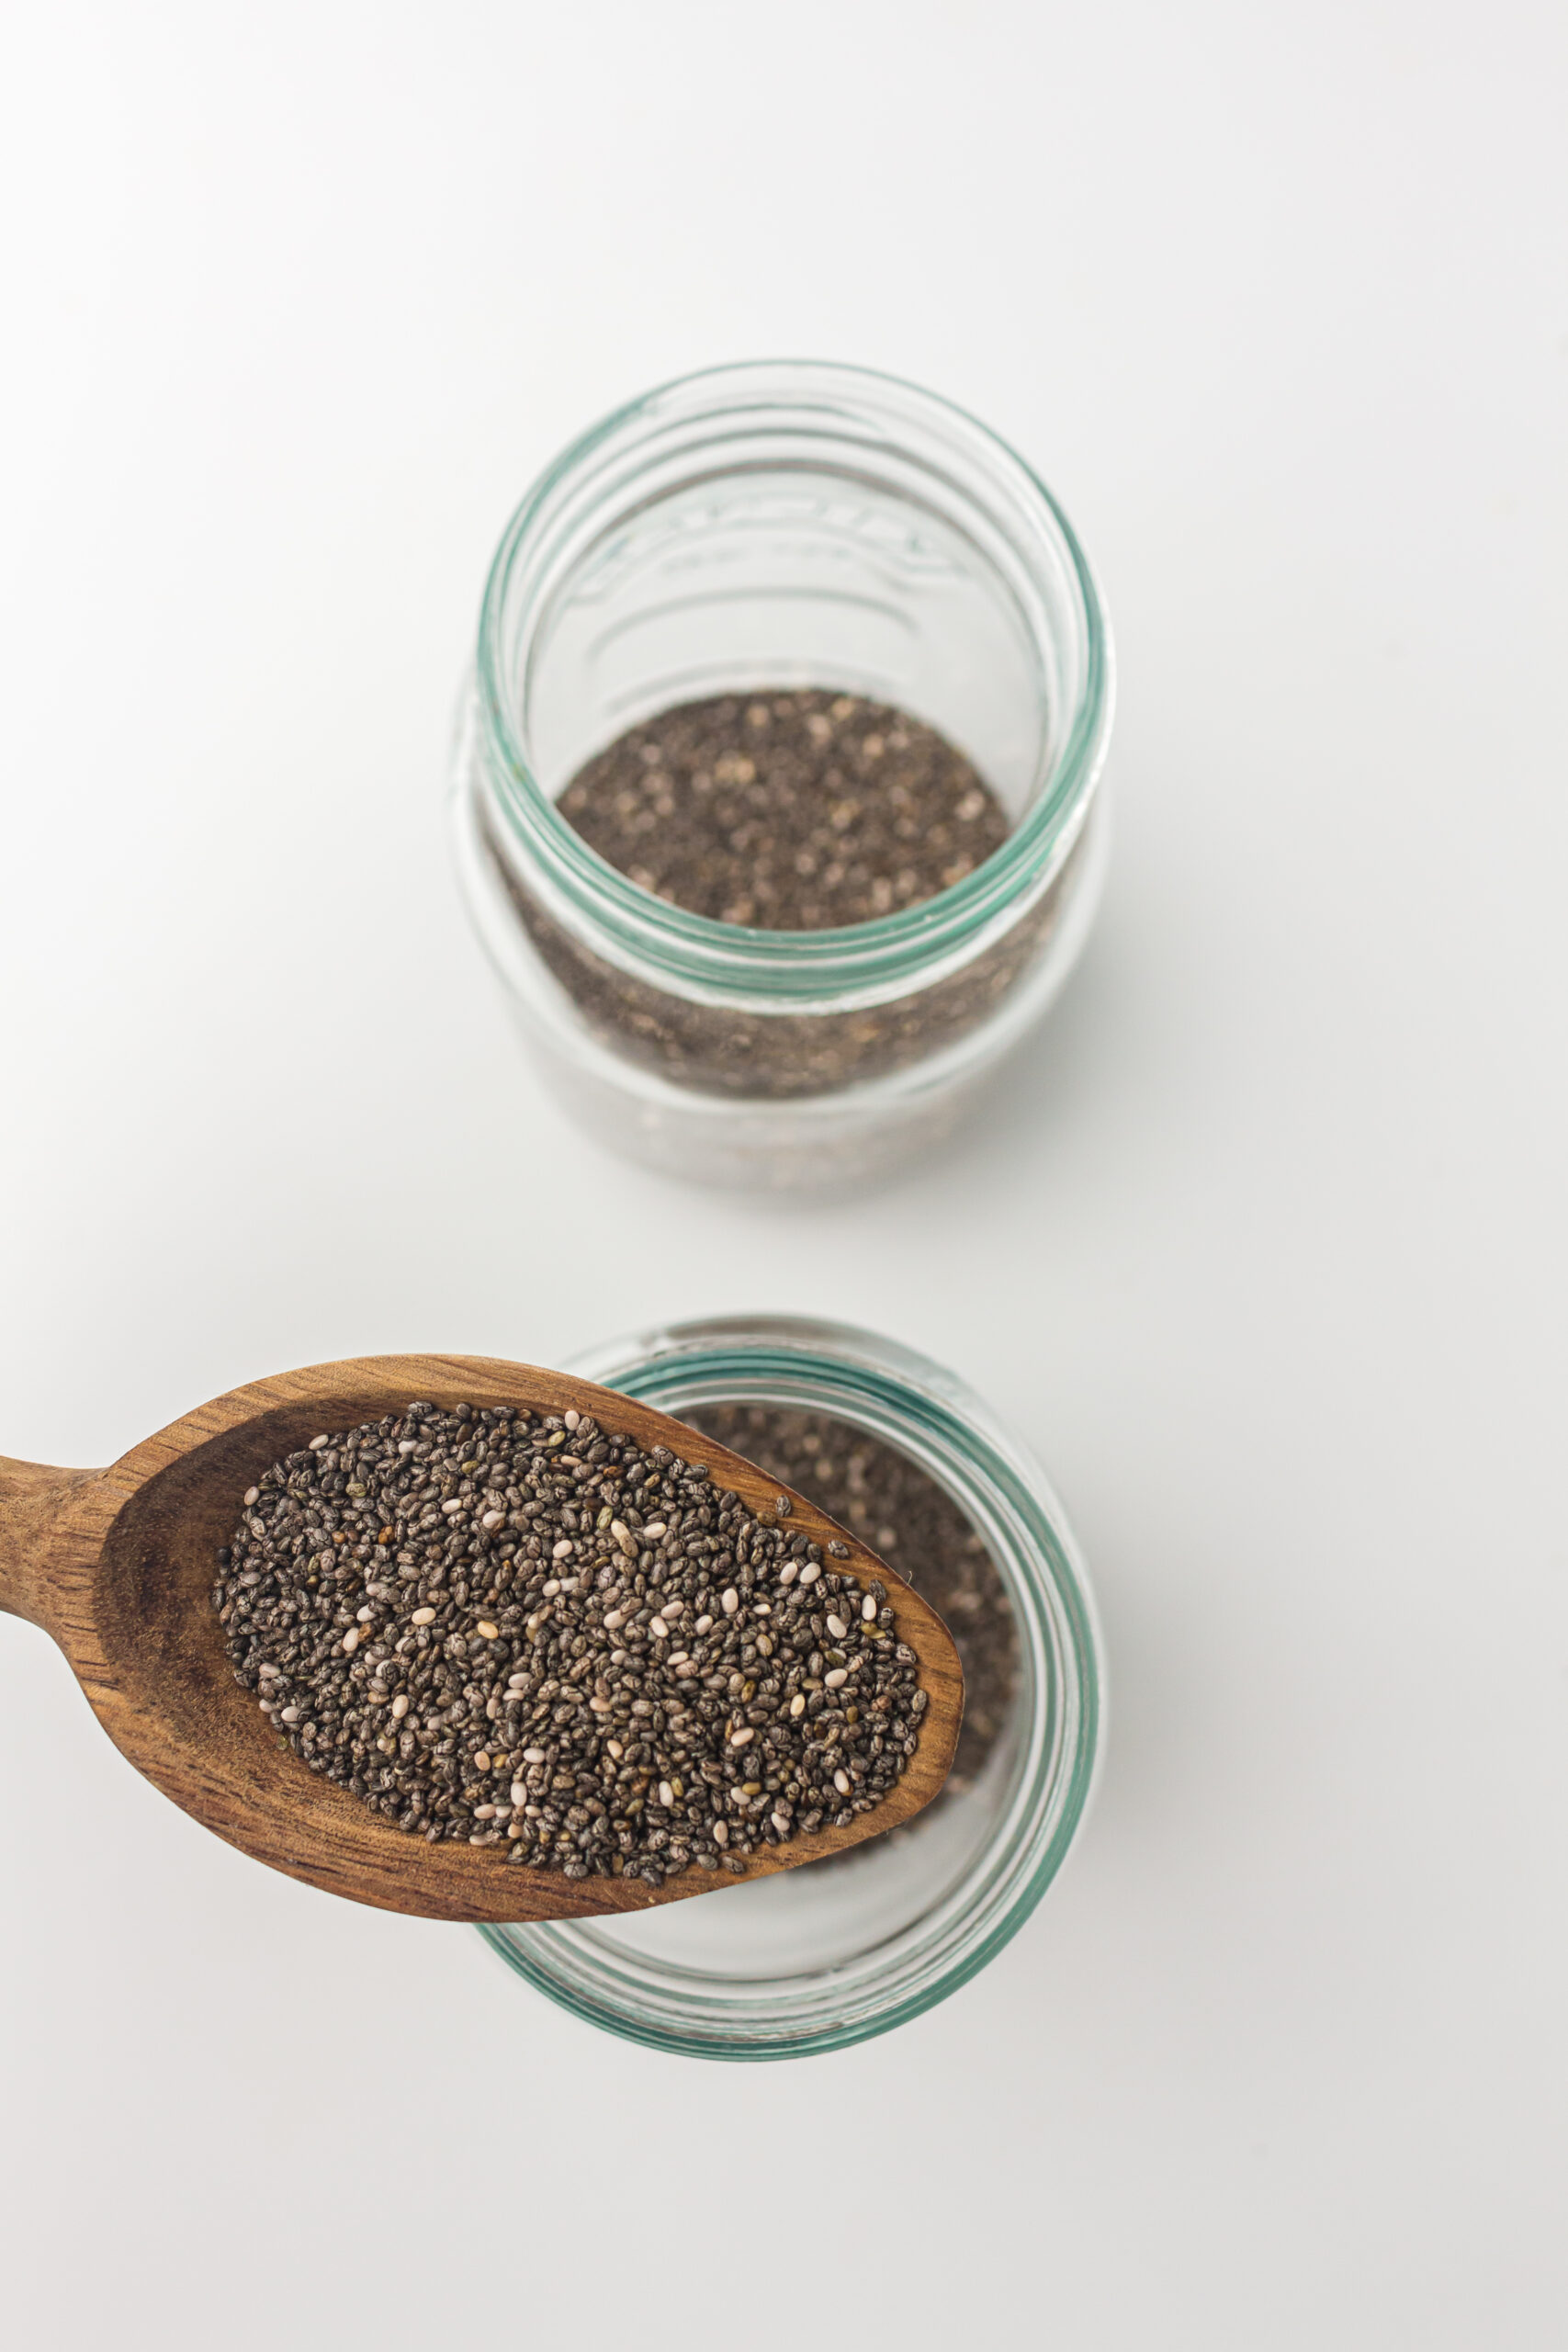 Chia seeds about to be put in mason jar